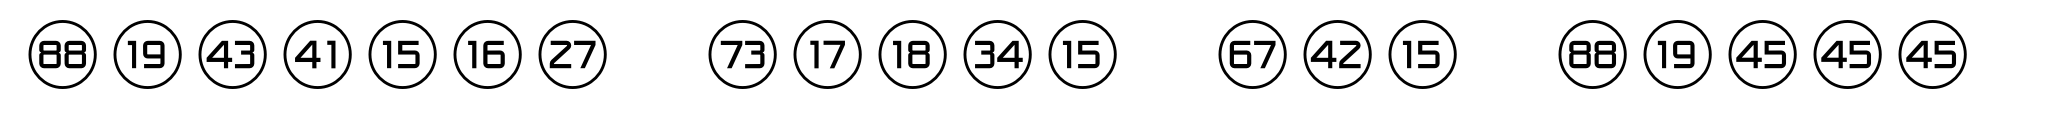 Numbers Style One Numbers Style One Circle Positive image